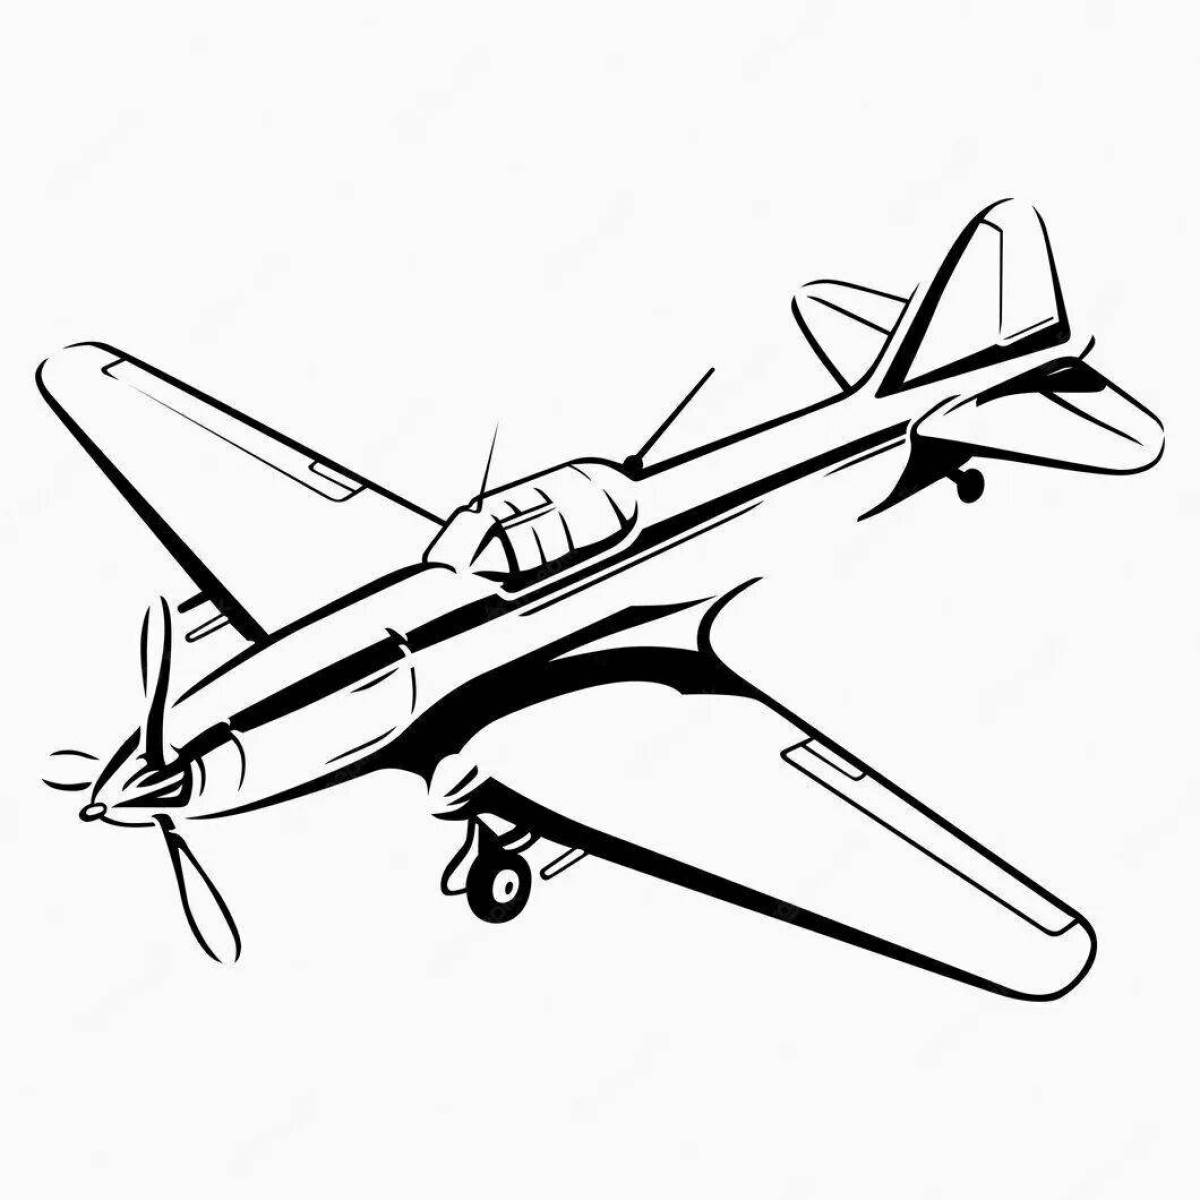 Grand silt 2 plane coloring page